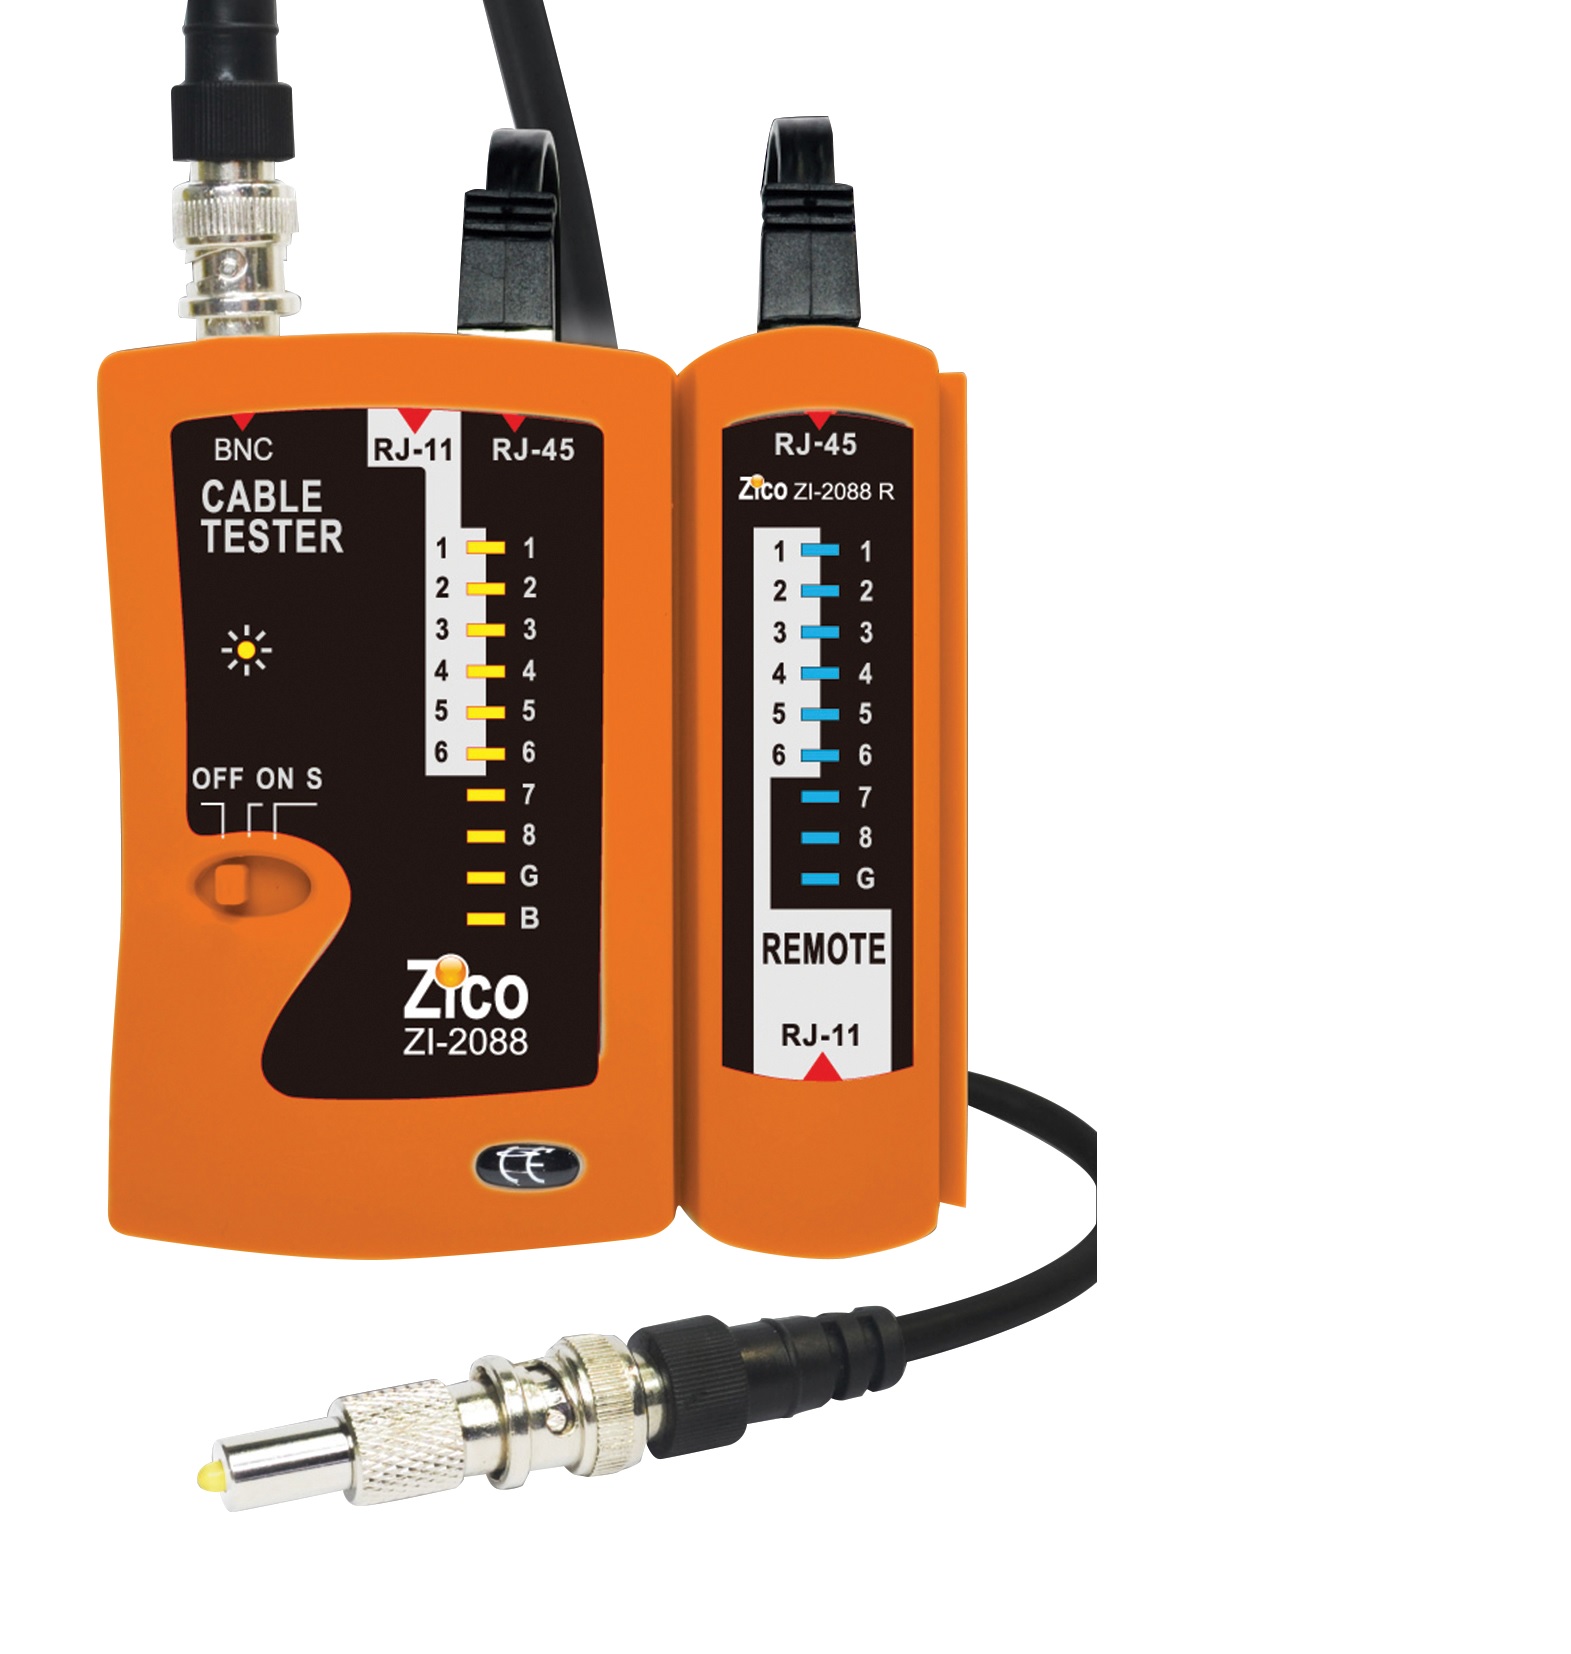 ZI-2088 cable tester